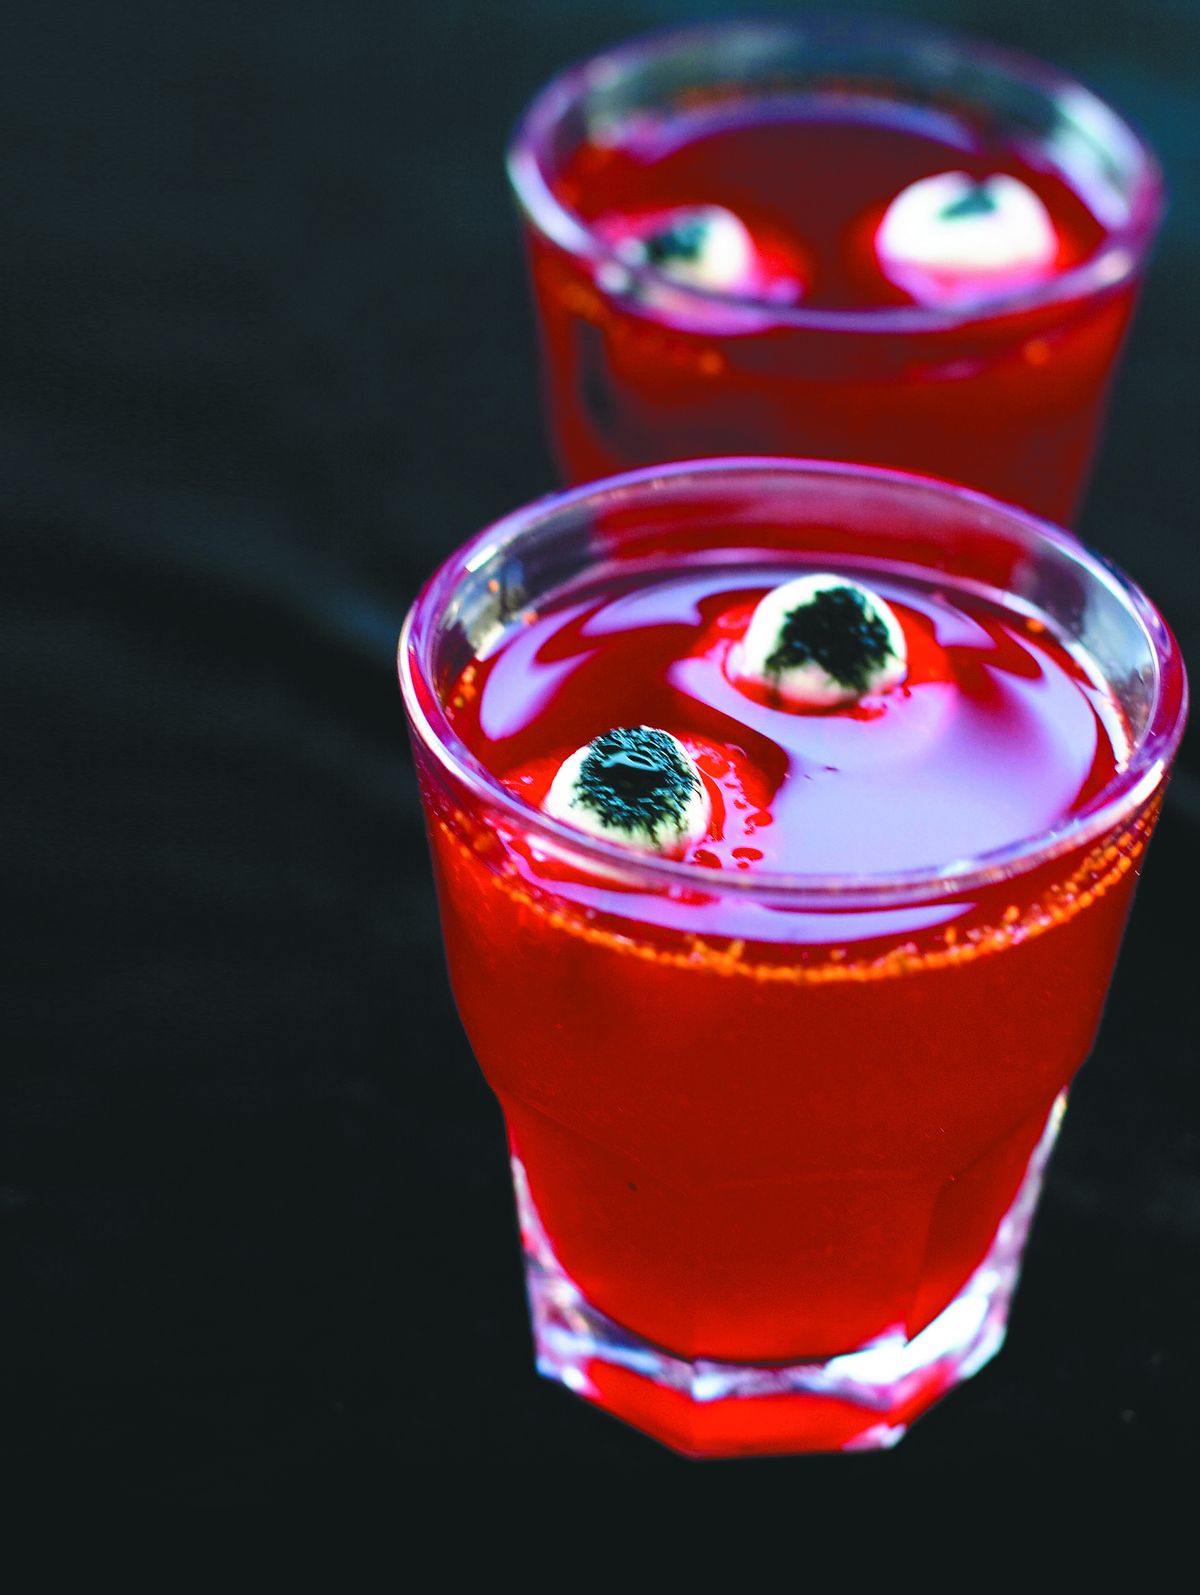 Blood Sippers will be among the many bloody good cocktails getting mixed up this Halloween. (Associated Press)